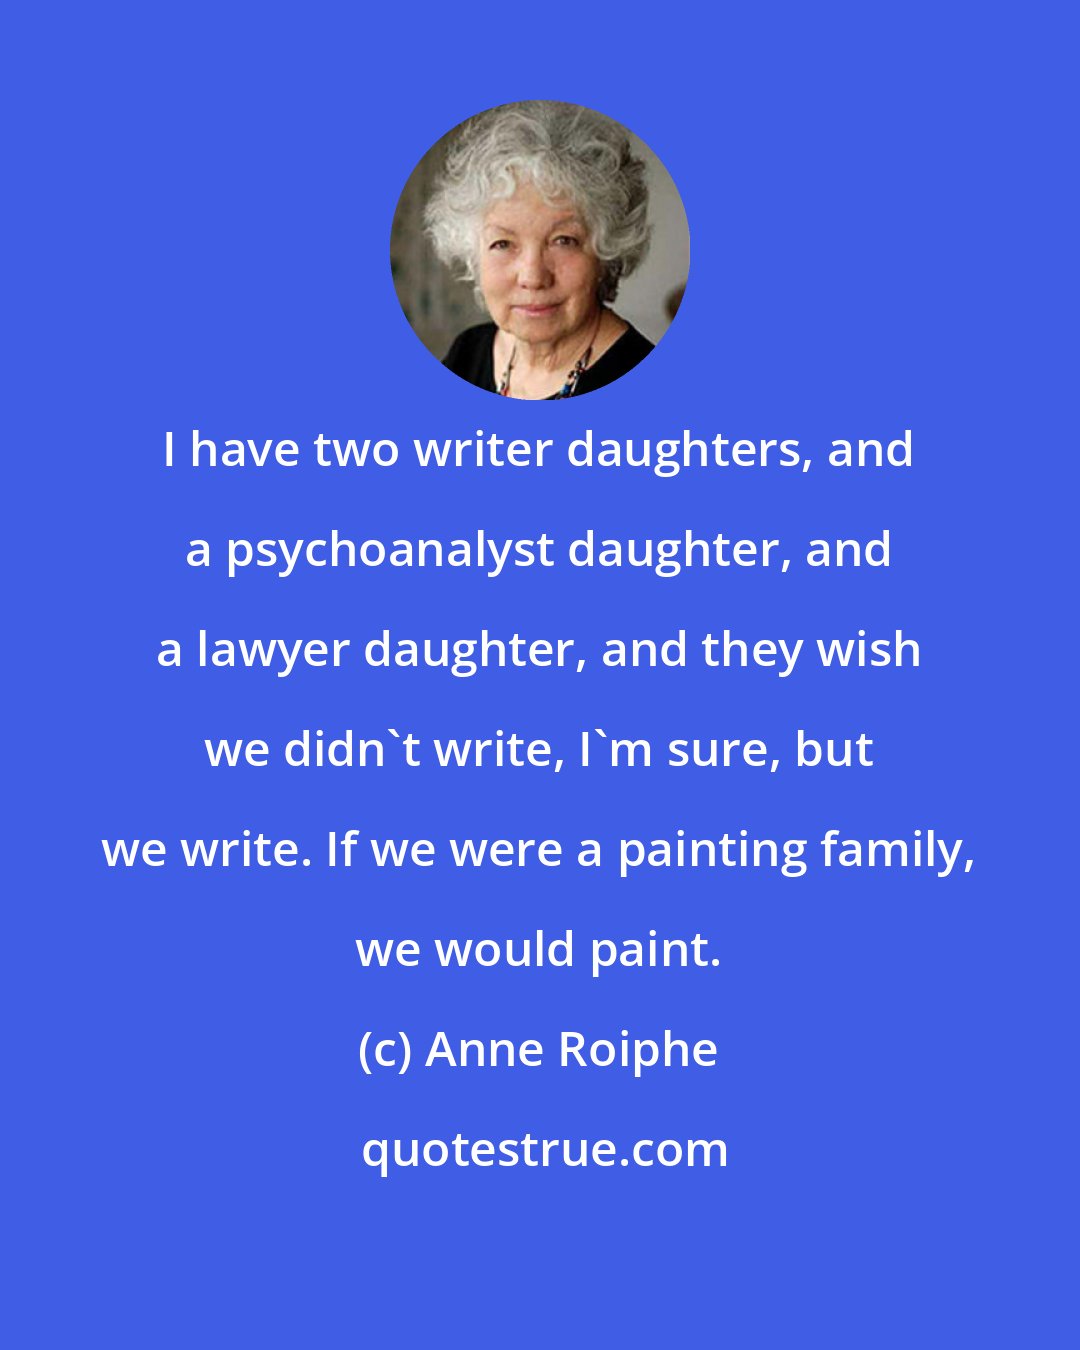 Anne Roiphe: I have two writer daughters, and a psychoanalyst daughter, and a lawyer daughter, and they wish we didn't write, I'm sure, but we write. If we were a painting family, we would paint.